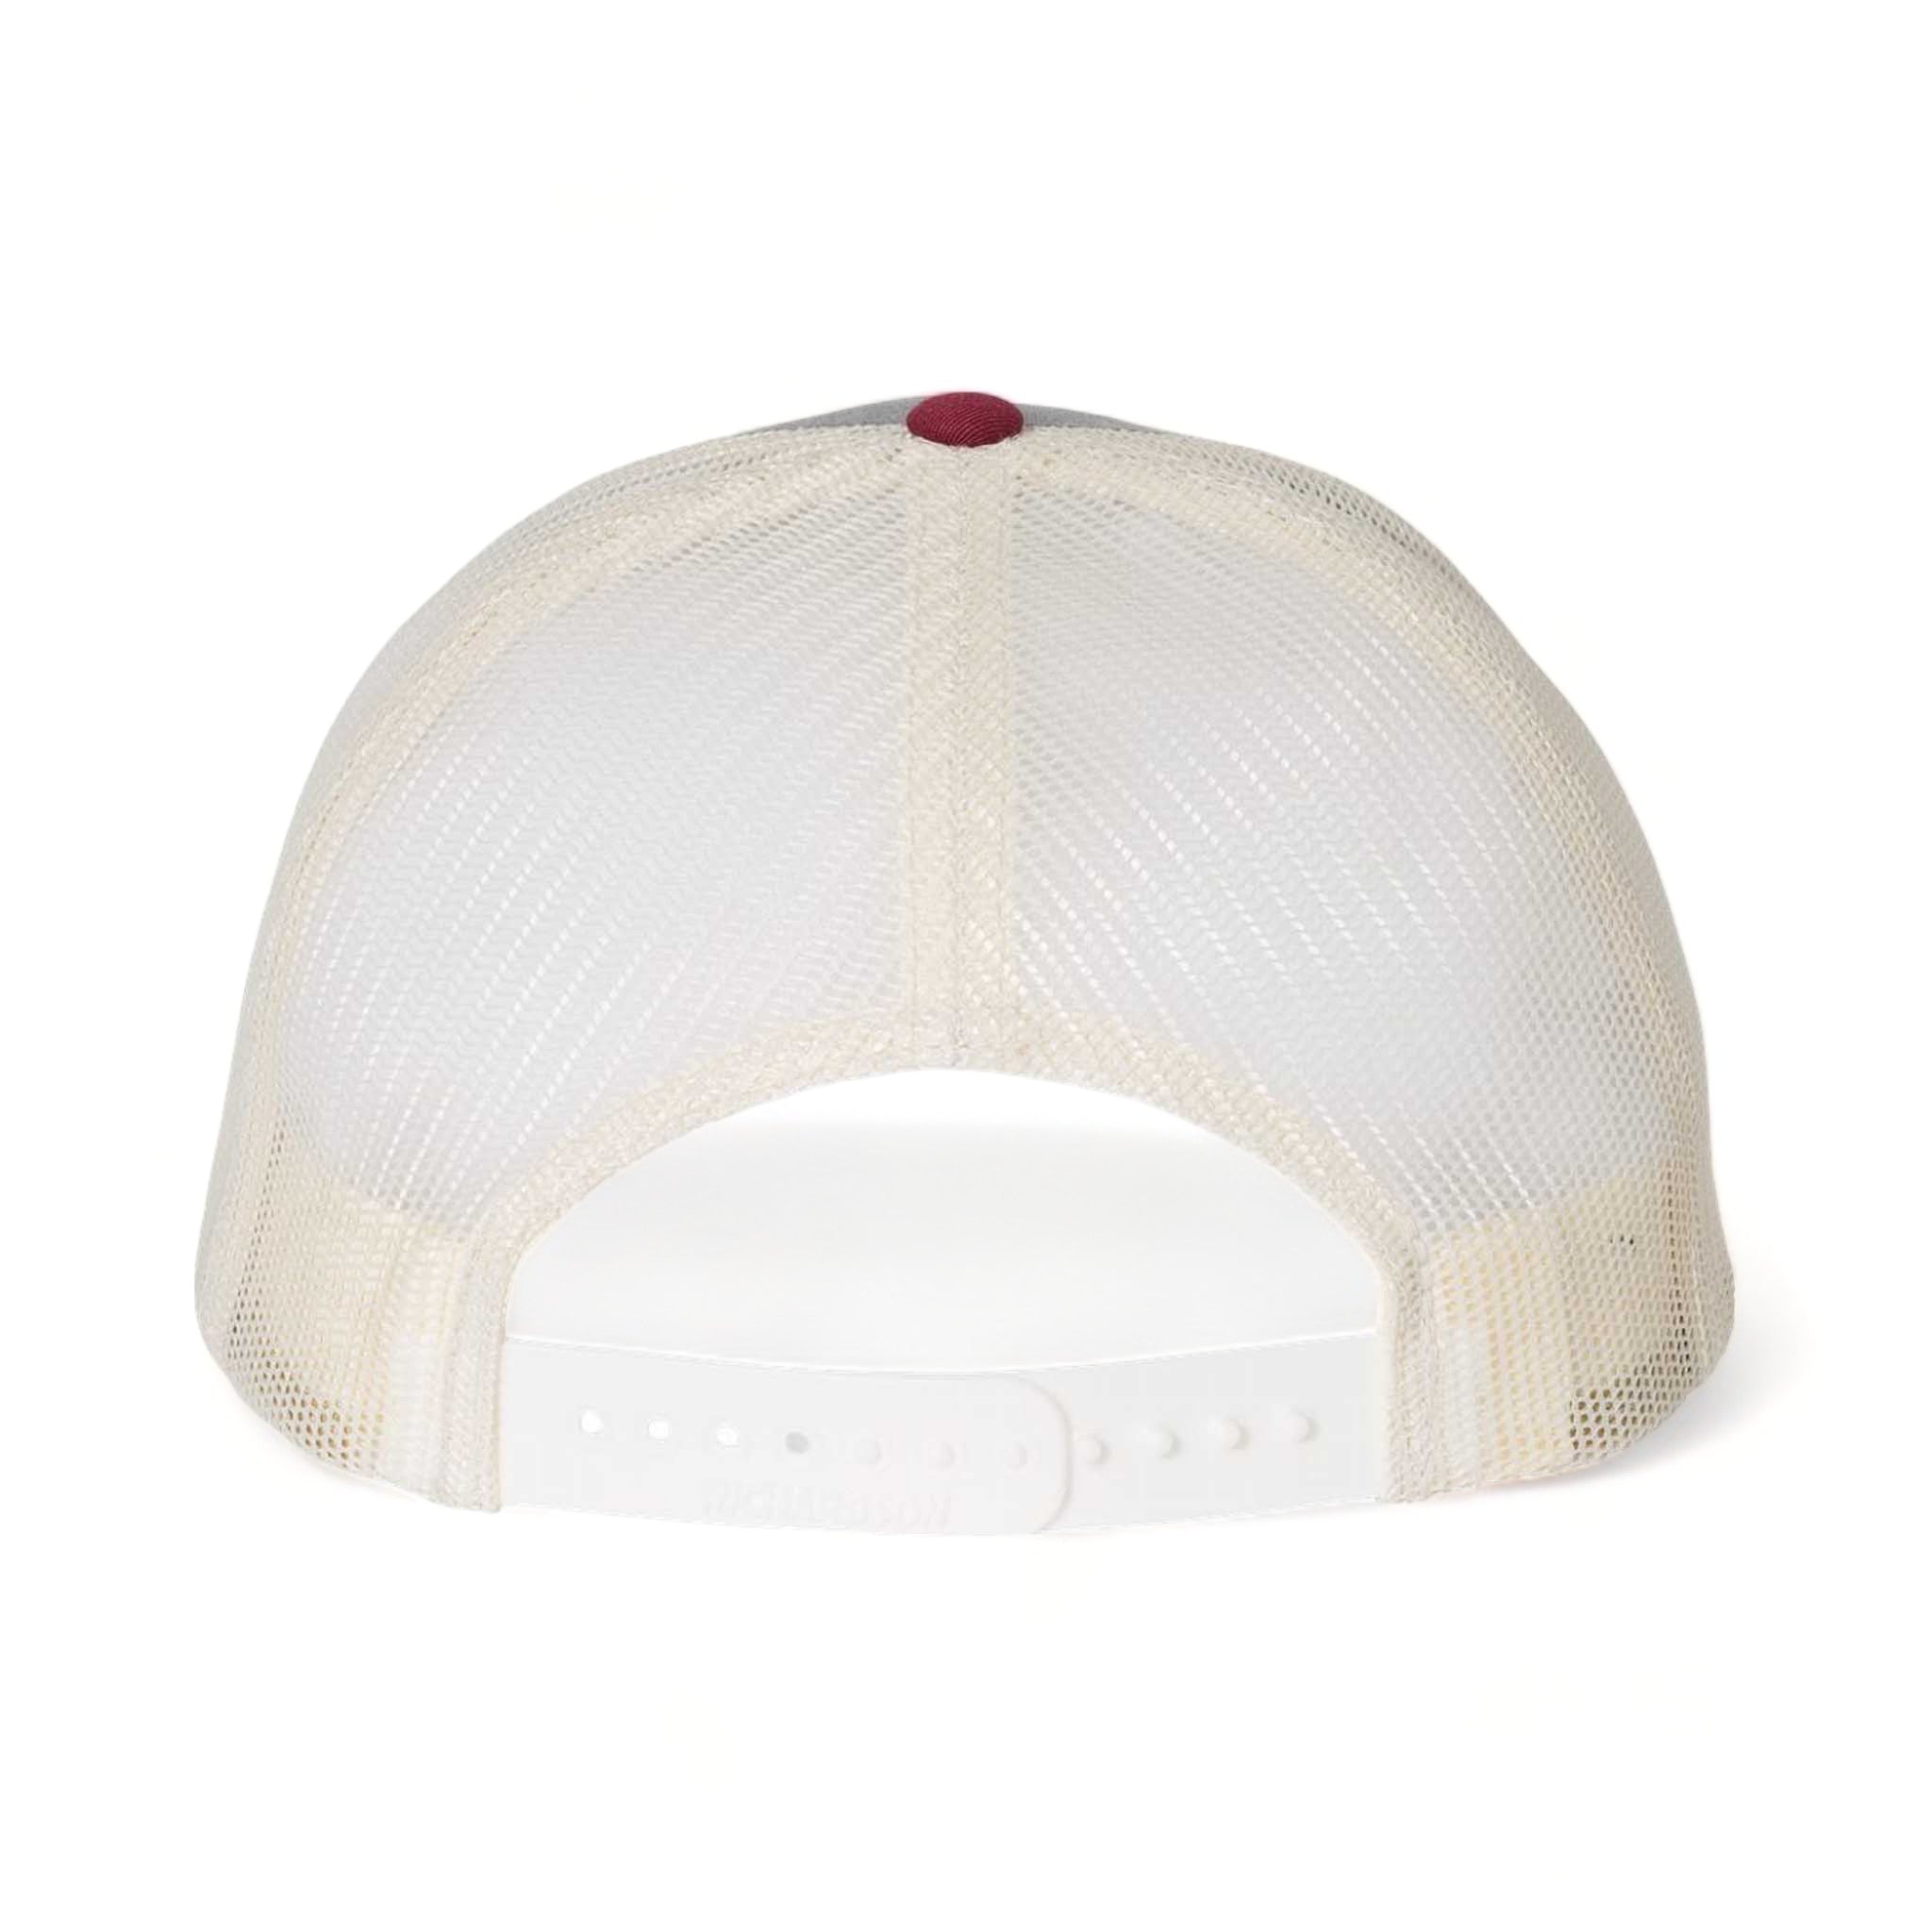 Back view of Richardson 115 custom hat in heather grey, birch and cardinal